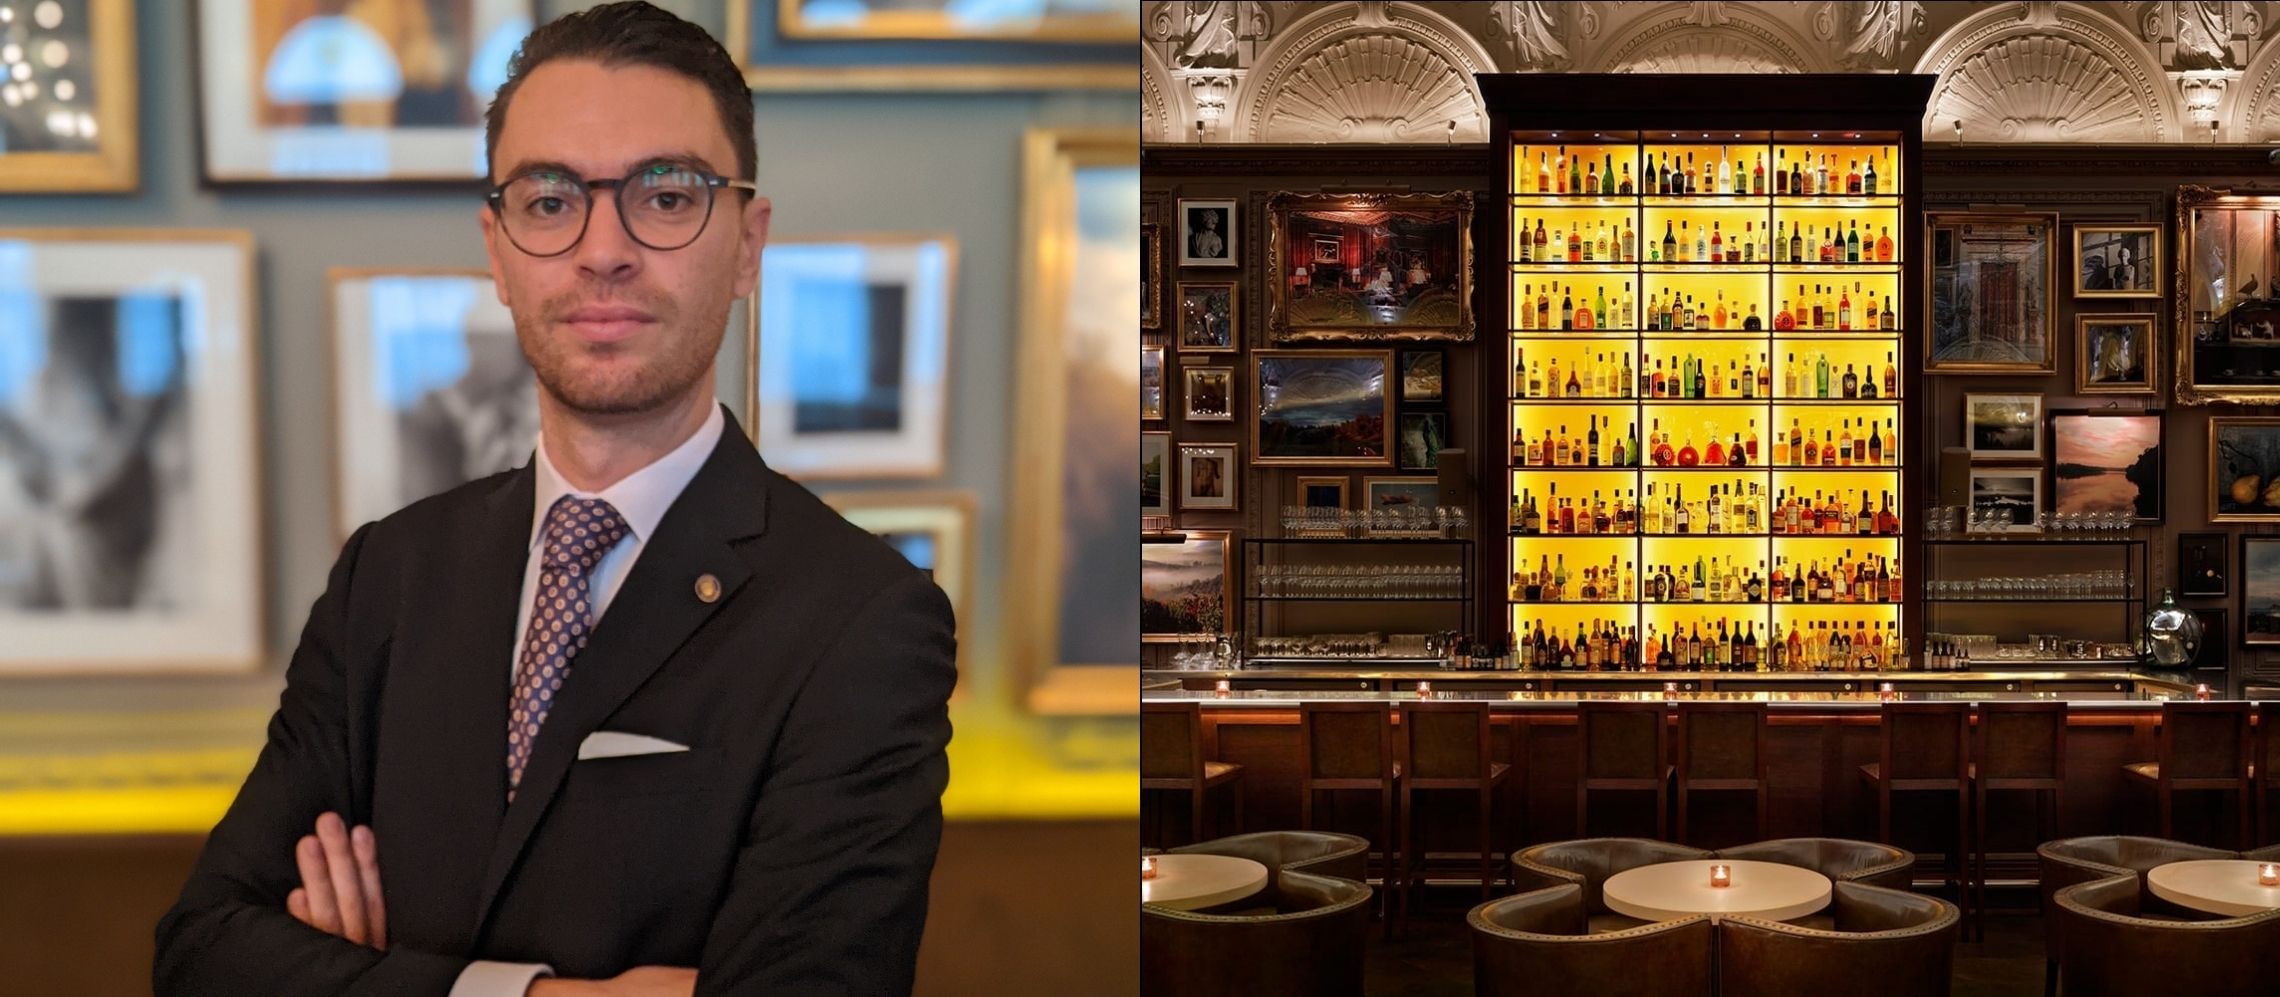 Photo for: Giuseppe D’Aniello shares his advice on how to be a leading sommelier 